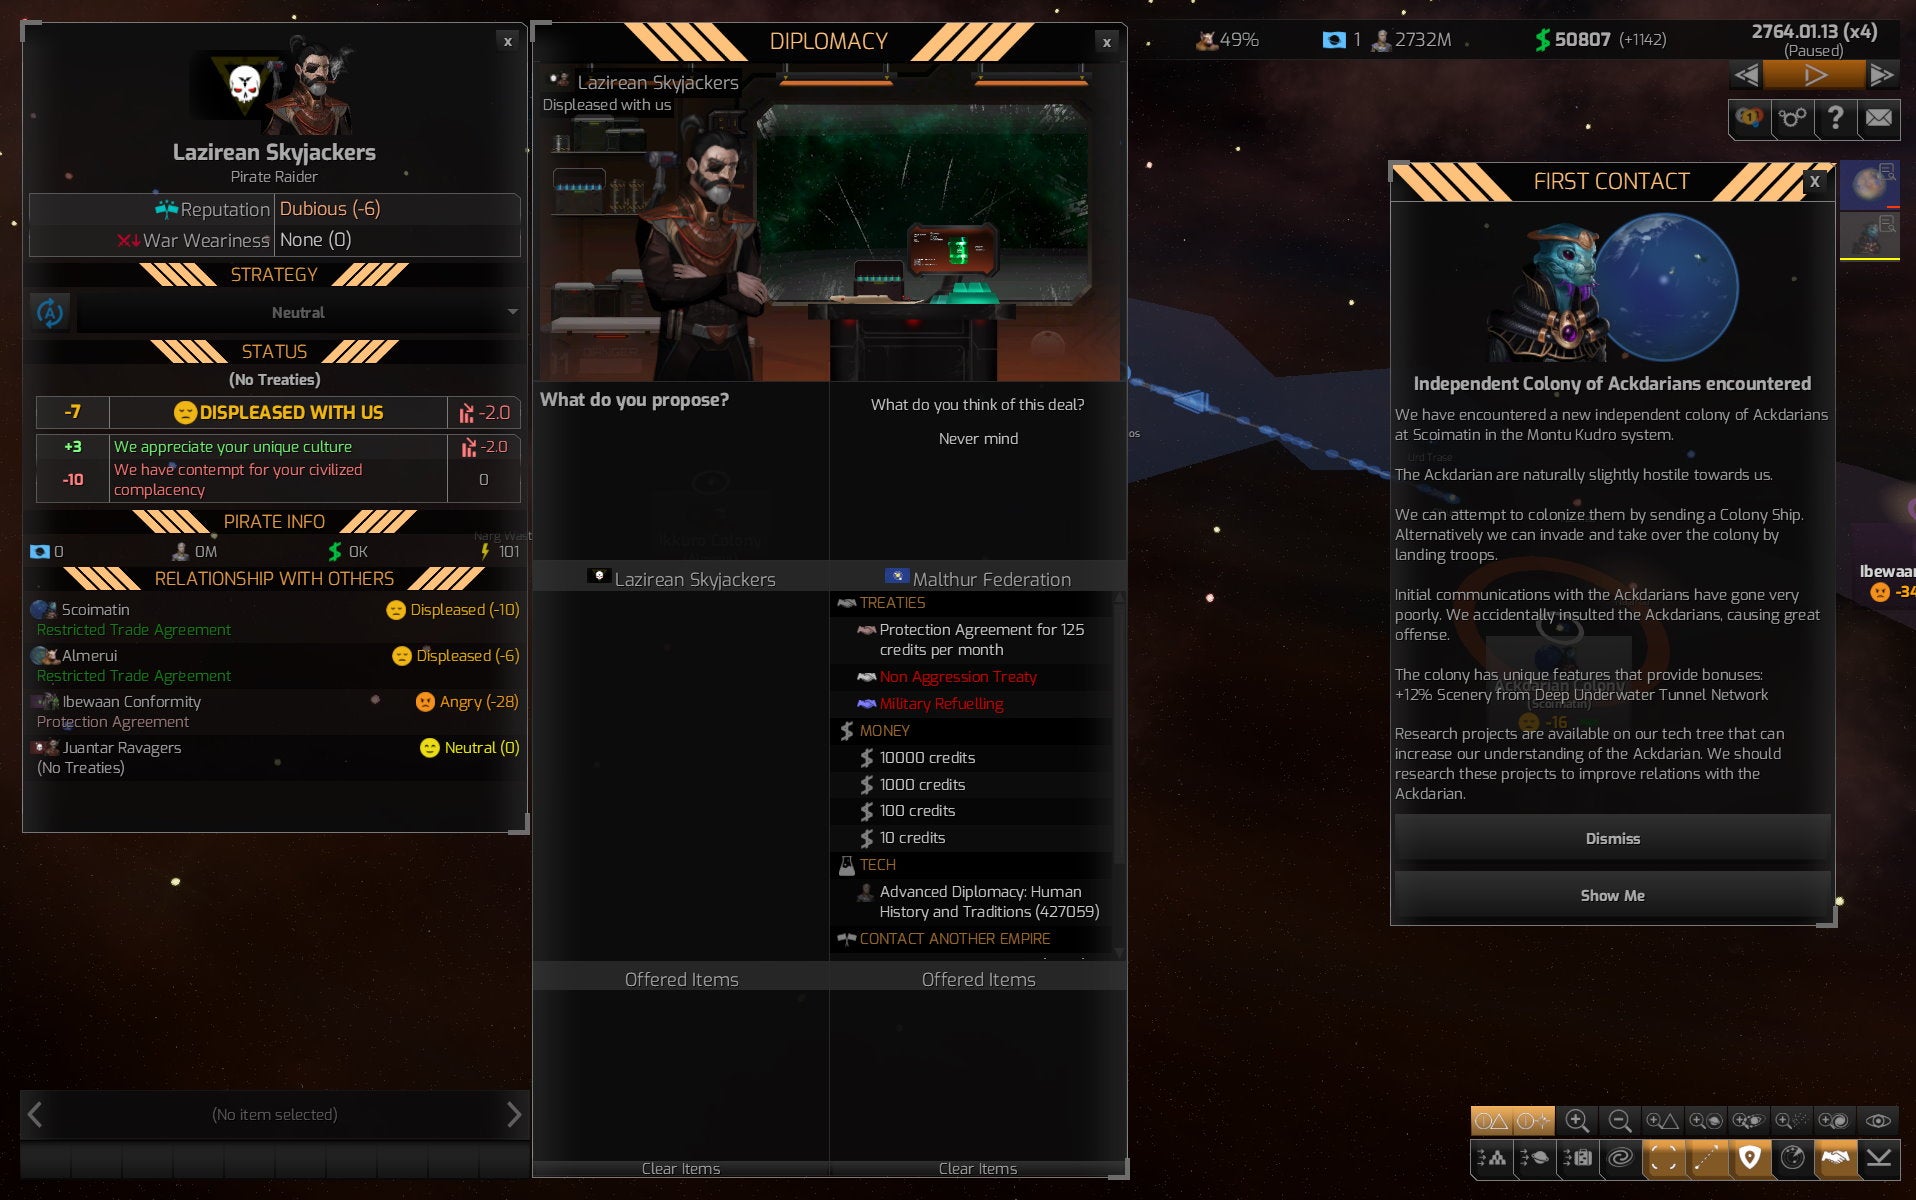 The diplomacy menu in Distant Worlds 2